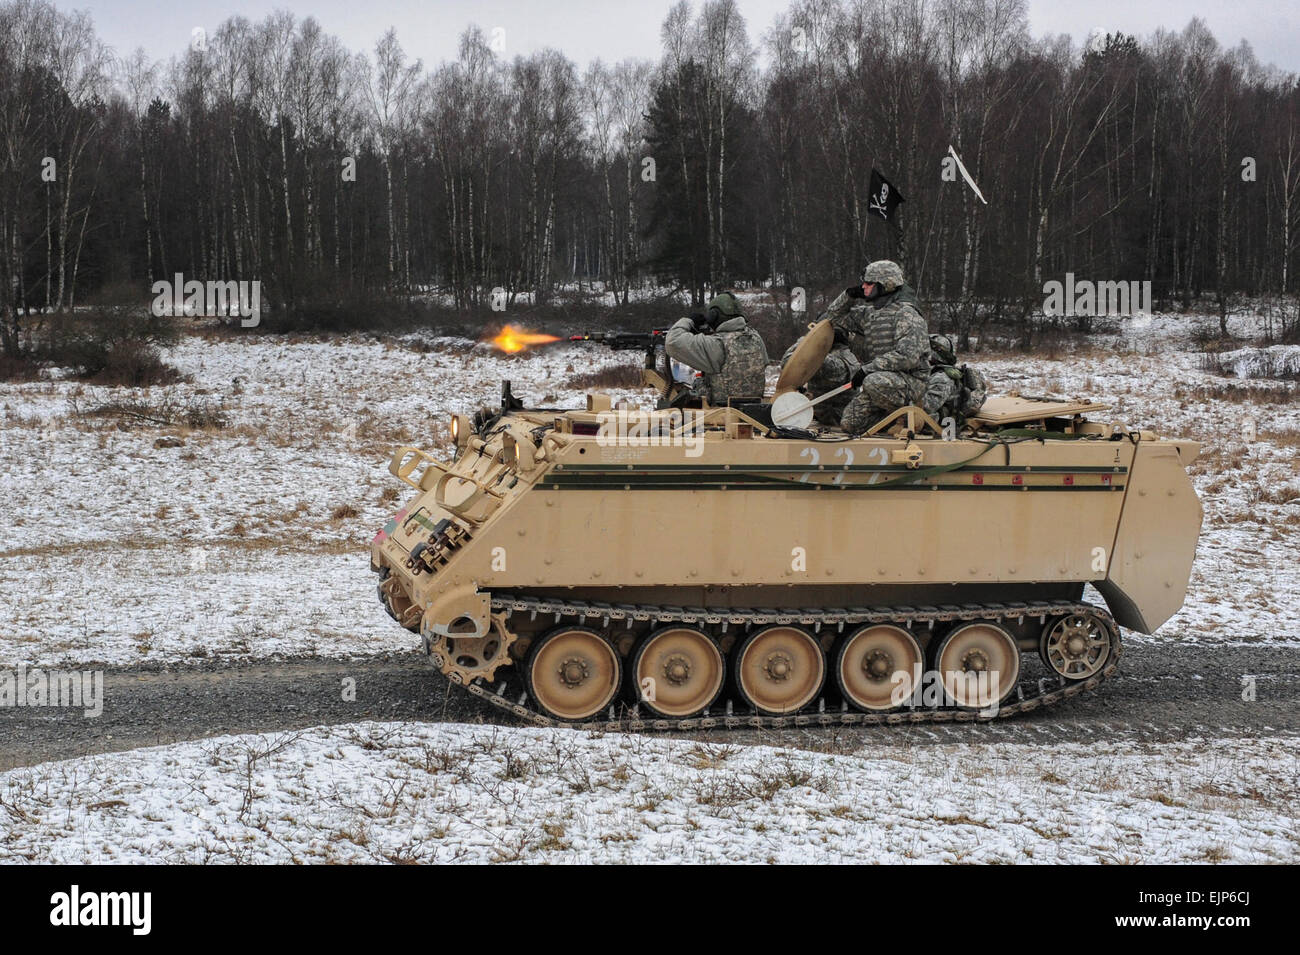 U.S. Army soldiers, assigned to Bravo Company, 1st Battalion, 4th Infantry Regiment, engage a target from a M113A2 armored vehicle during squad maneuver training at Grafenwoehr Training Area on Jan. 14, 2013. The soldiers of 1-4 Infantry are U.S. Army Europe's professional opposing force for training at the 7th Army Joint Multinational Readiness Center in Hohenfels, Germany.  They routinely hone their skills at Grafenwoehr's multi-functional live-fire facilities.  Staff Sergeant Pablo N. Piedra/released Stock Photo